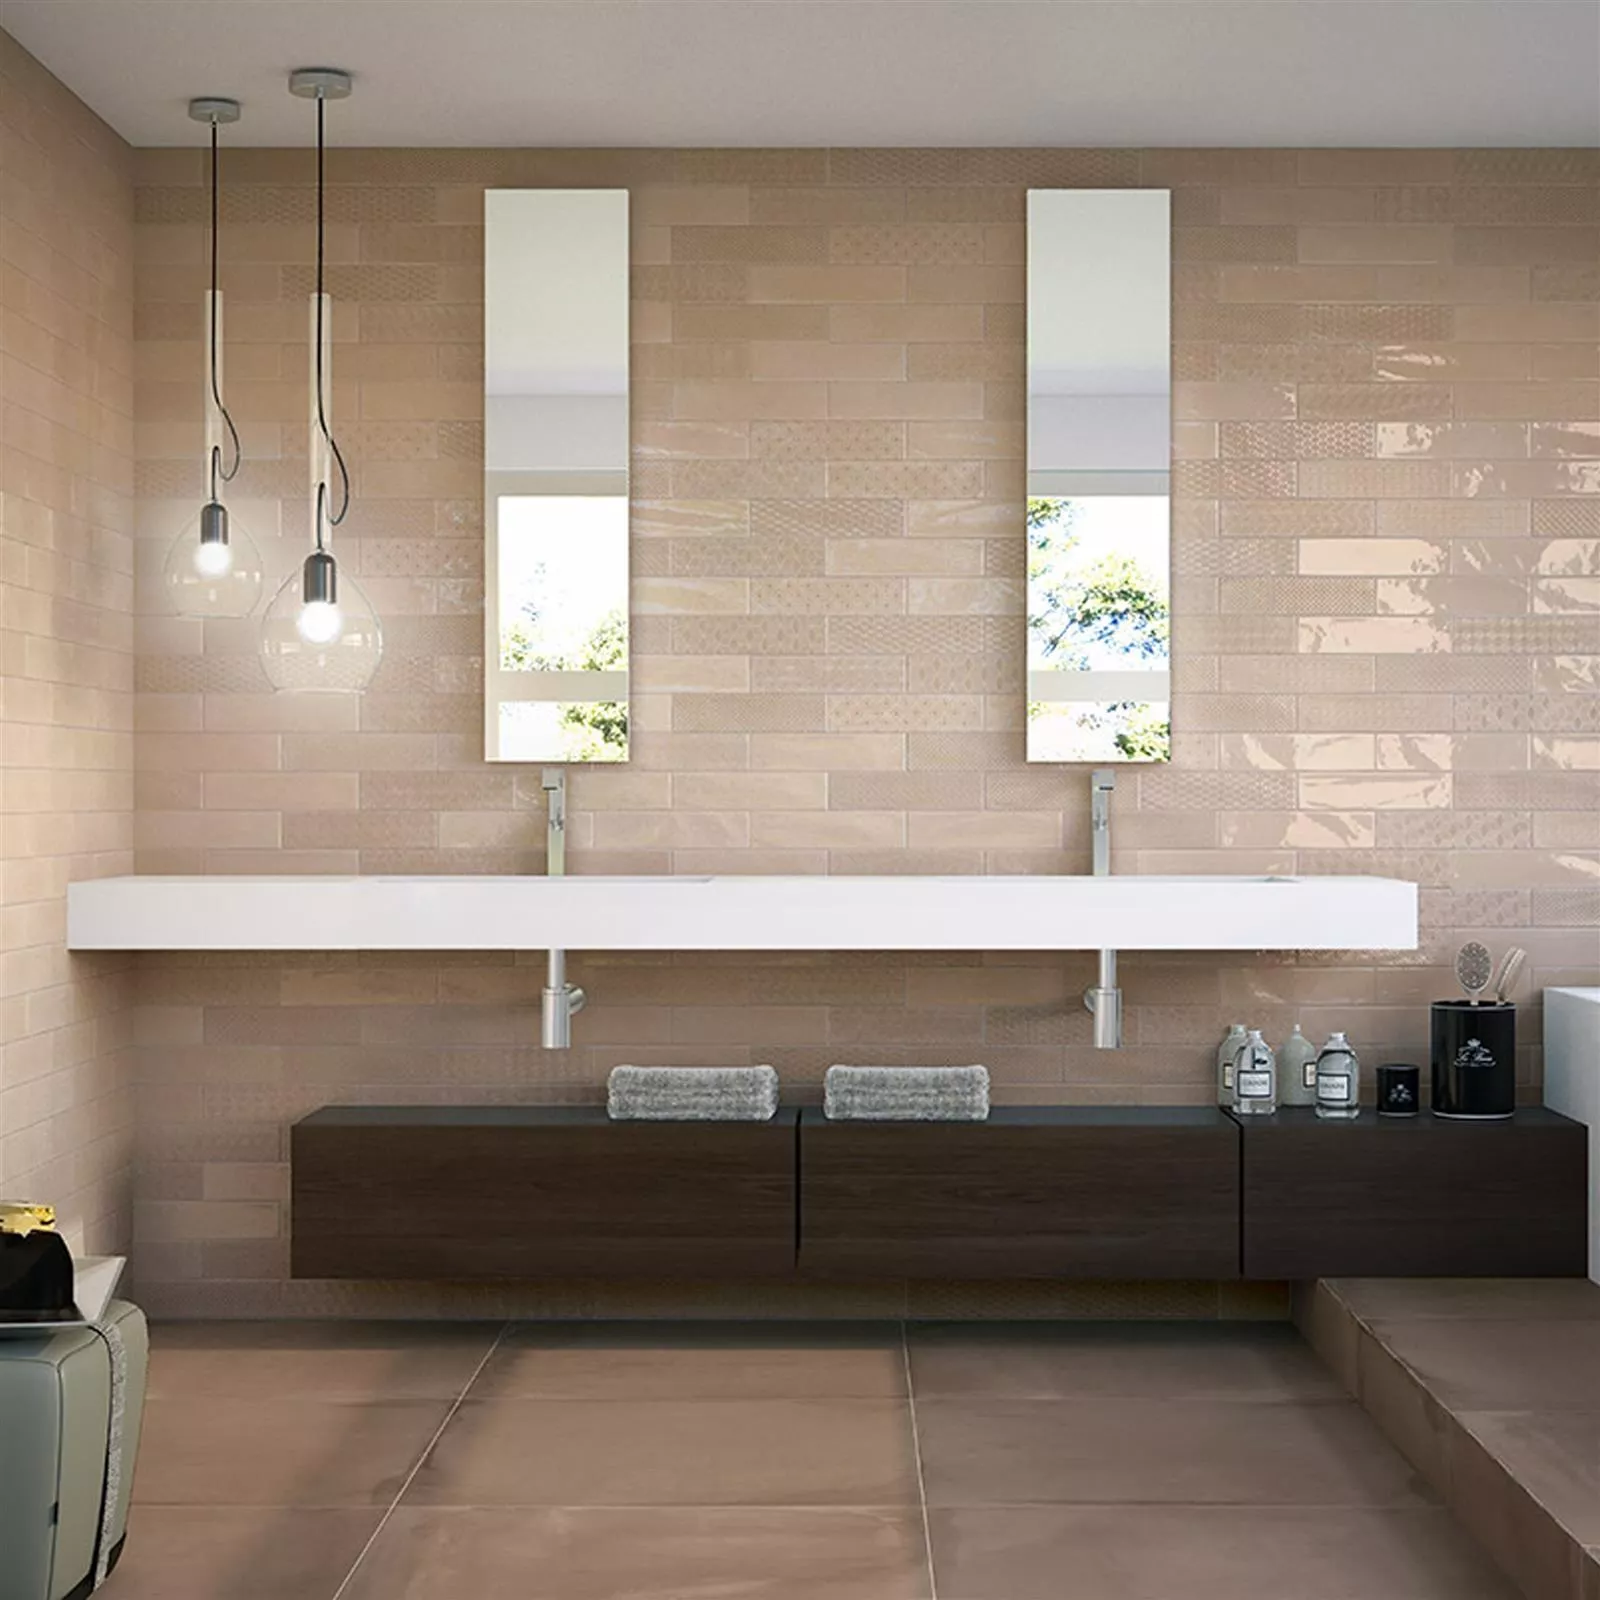 Sample Wall Tiles Conway Waved 7,5x30cm Light Brown